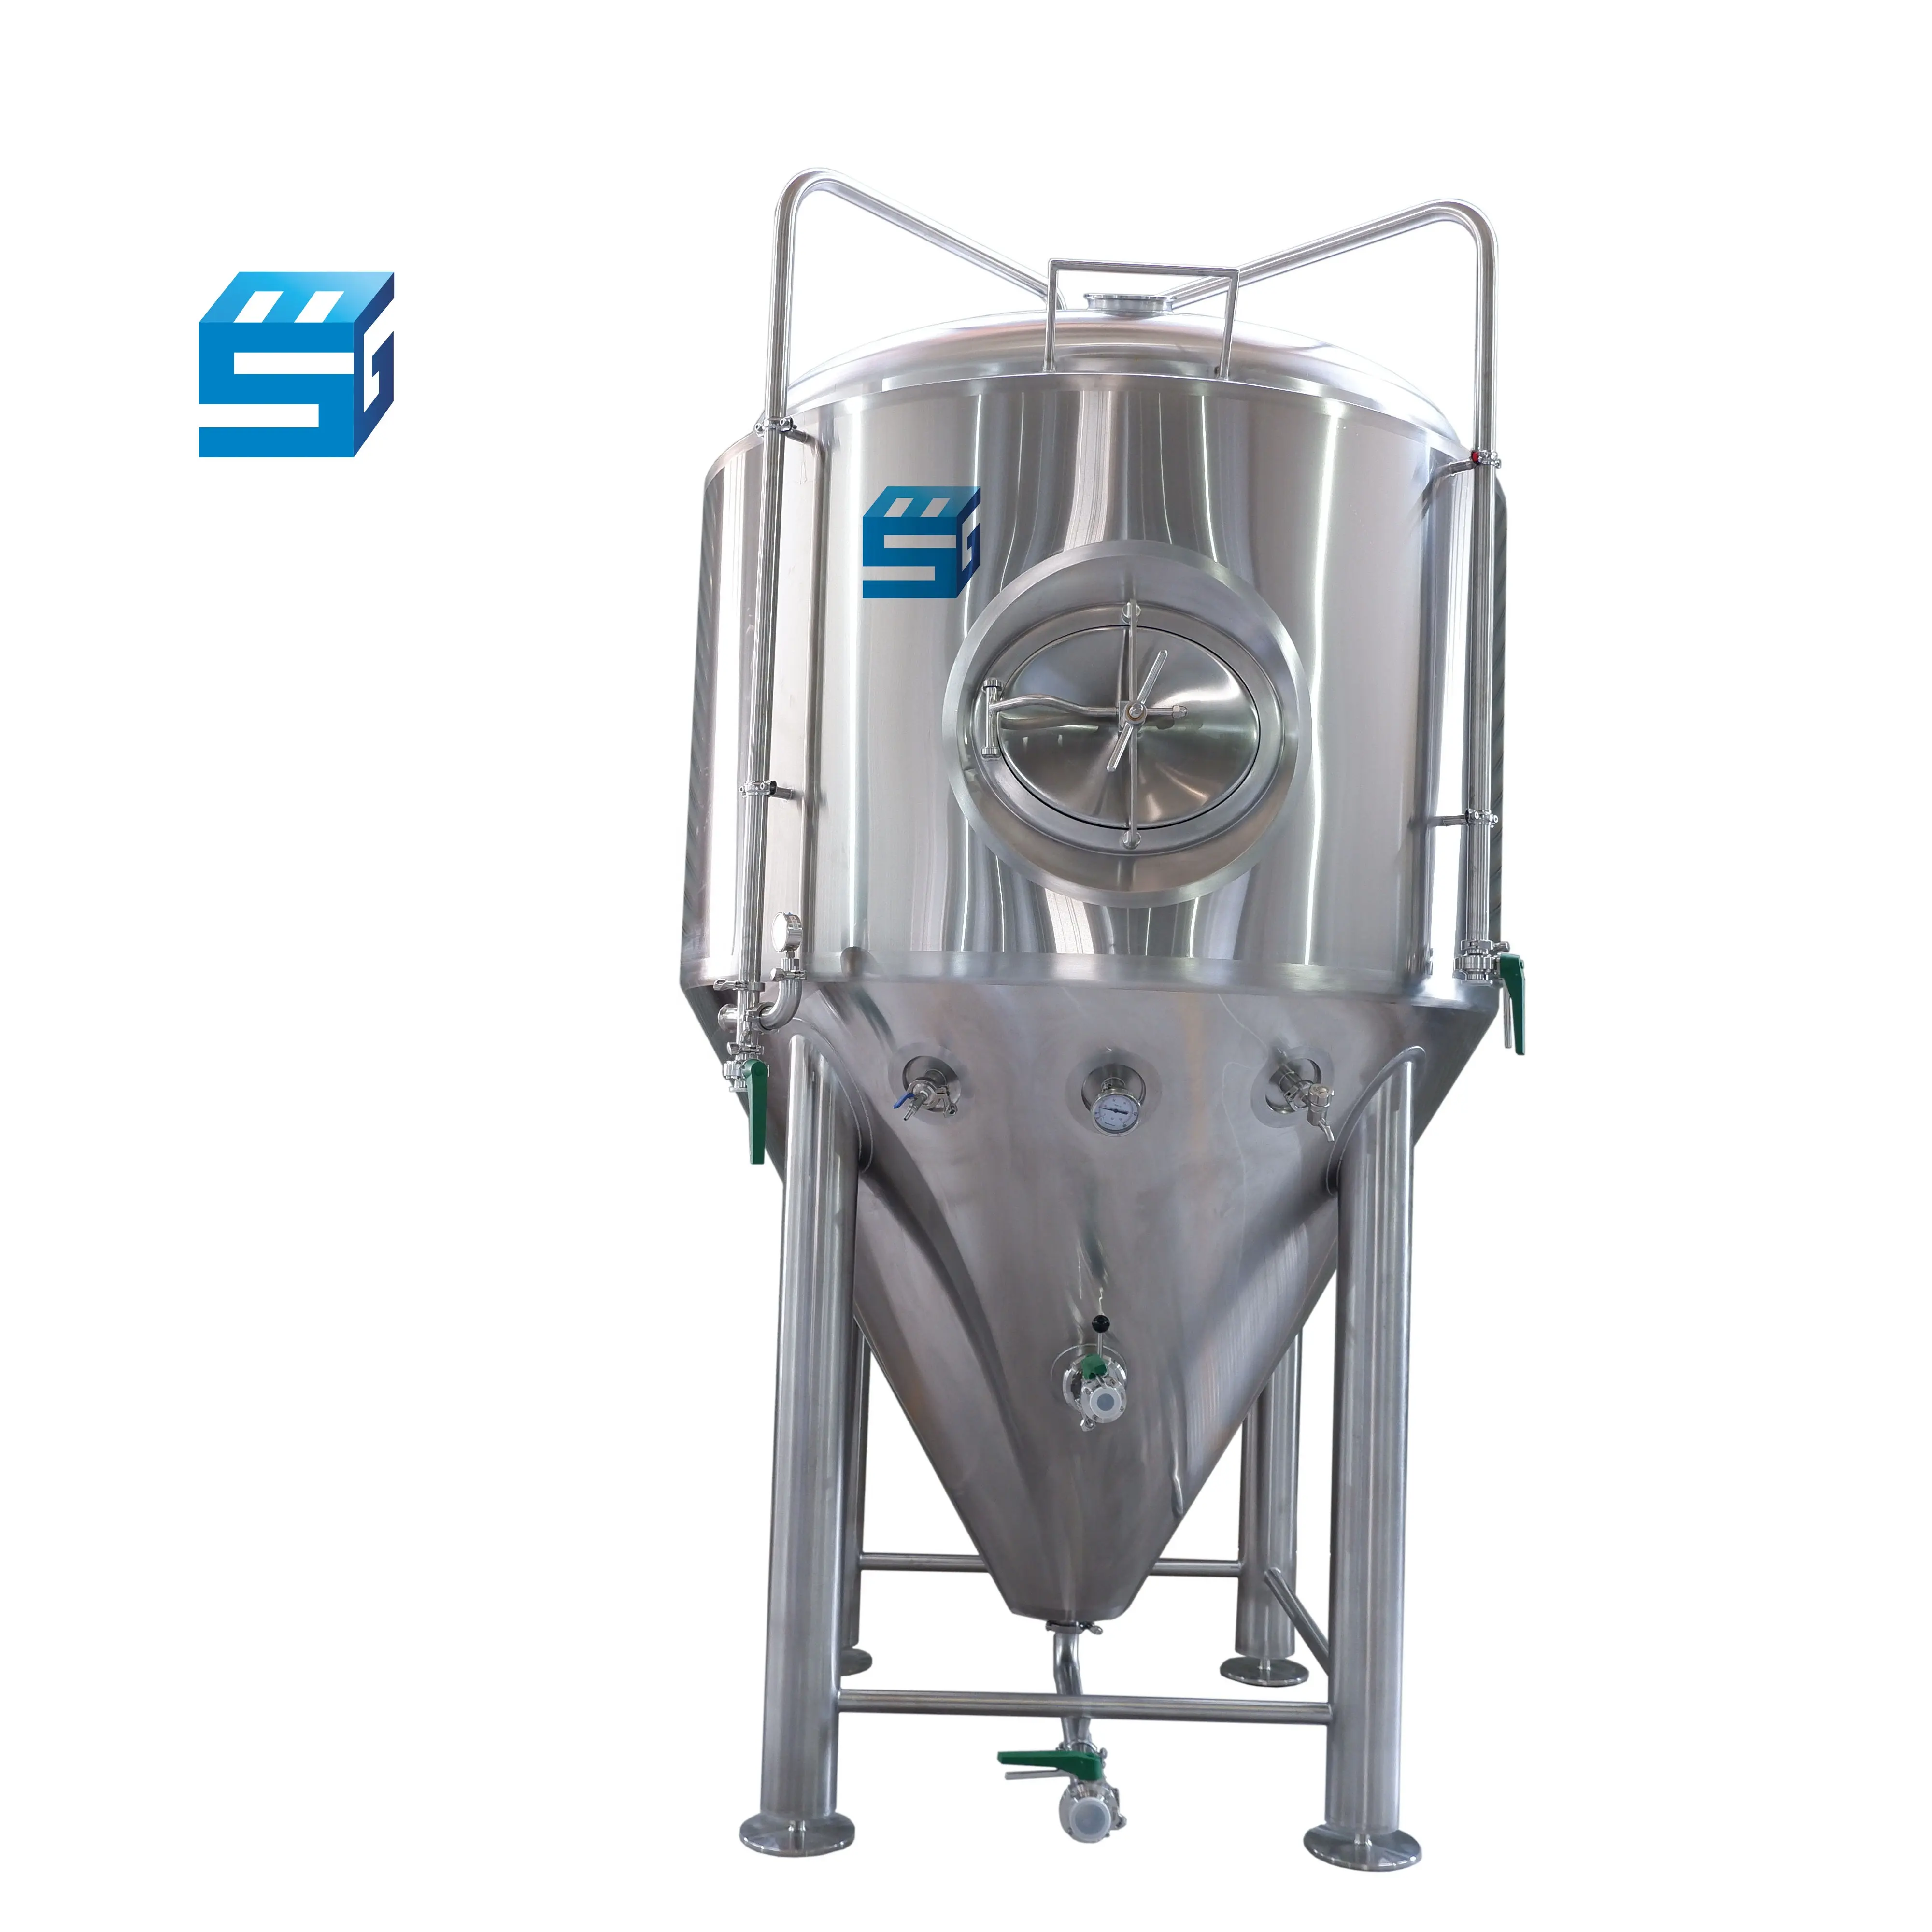 Deli unitank Fermenter Beer Tank, Cylindrical conical fermentation tanks, Cylindrical Jacketed fermenter for breweries